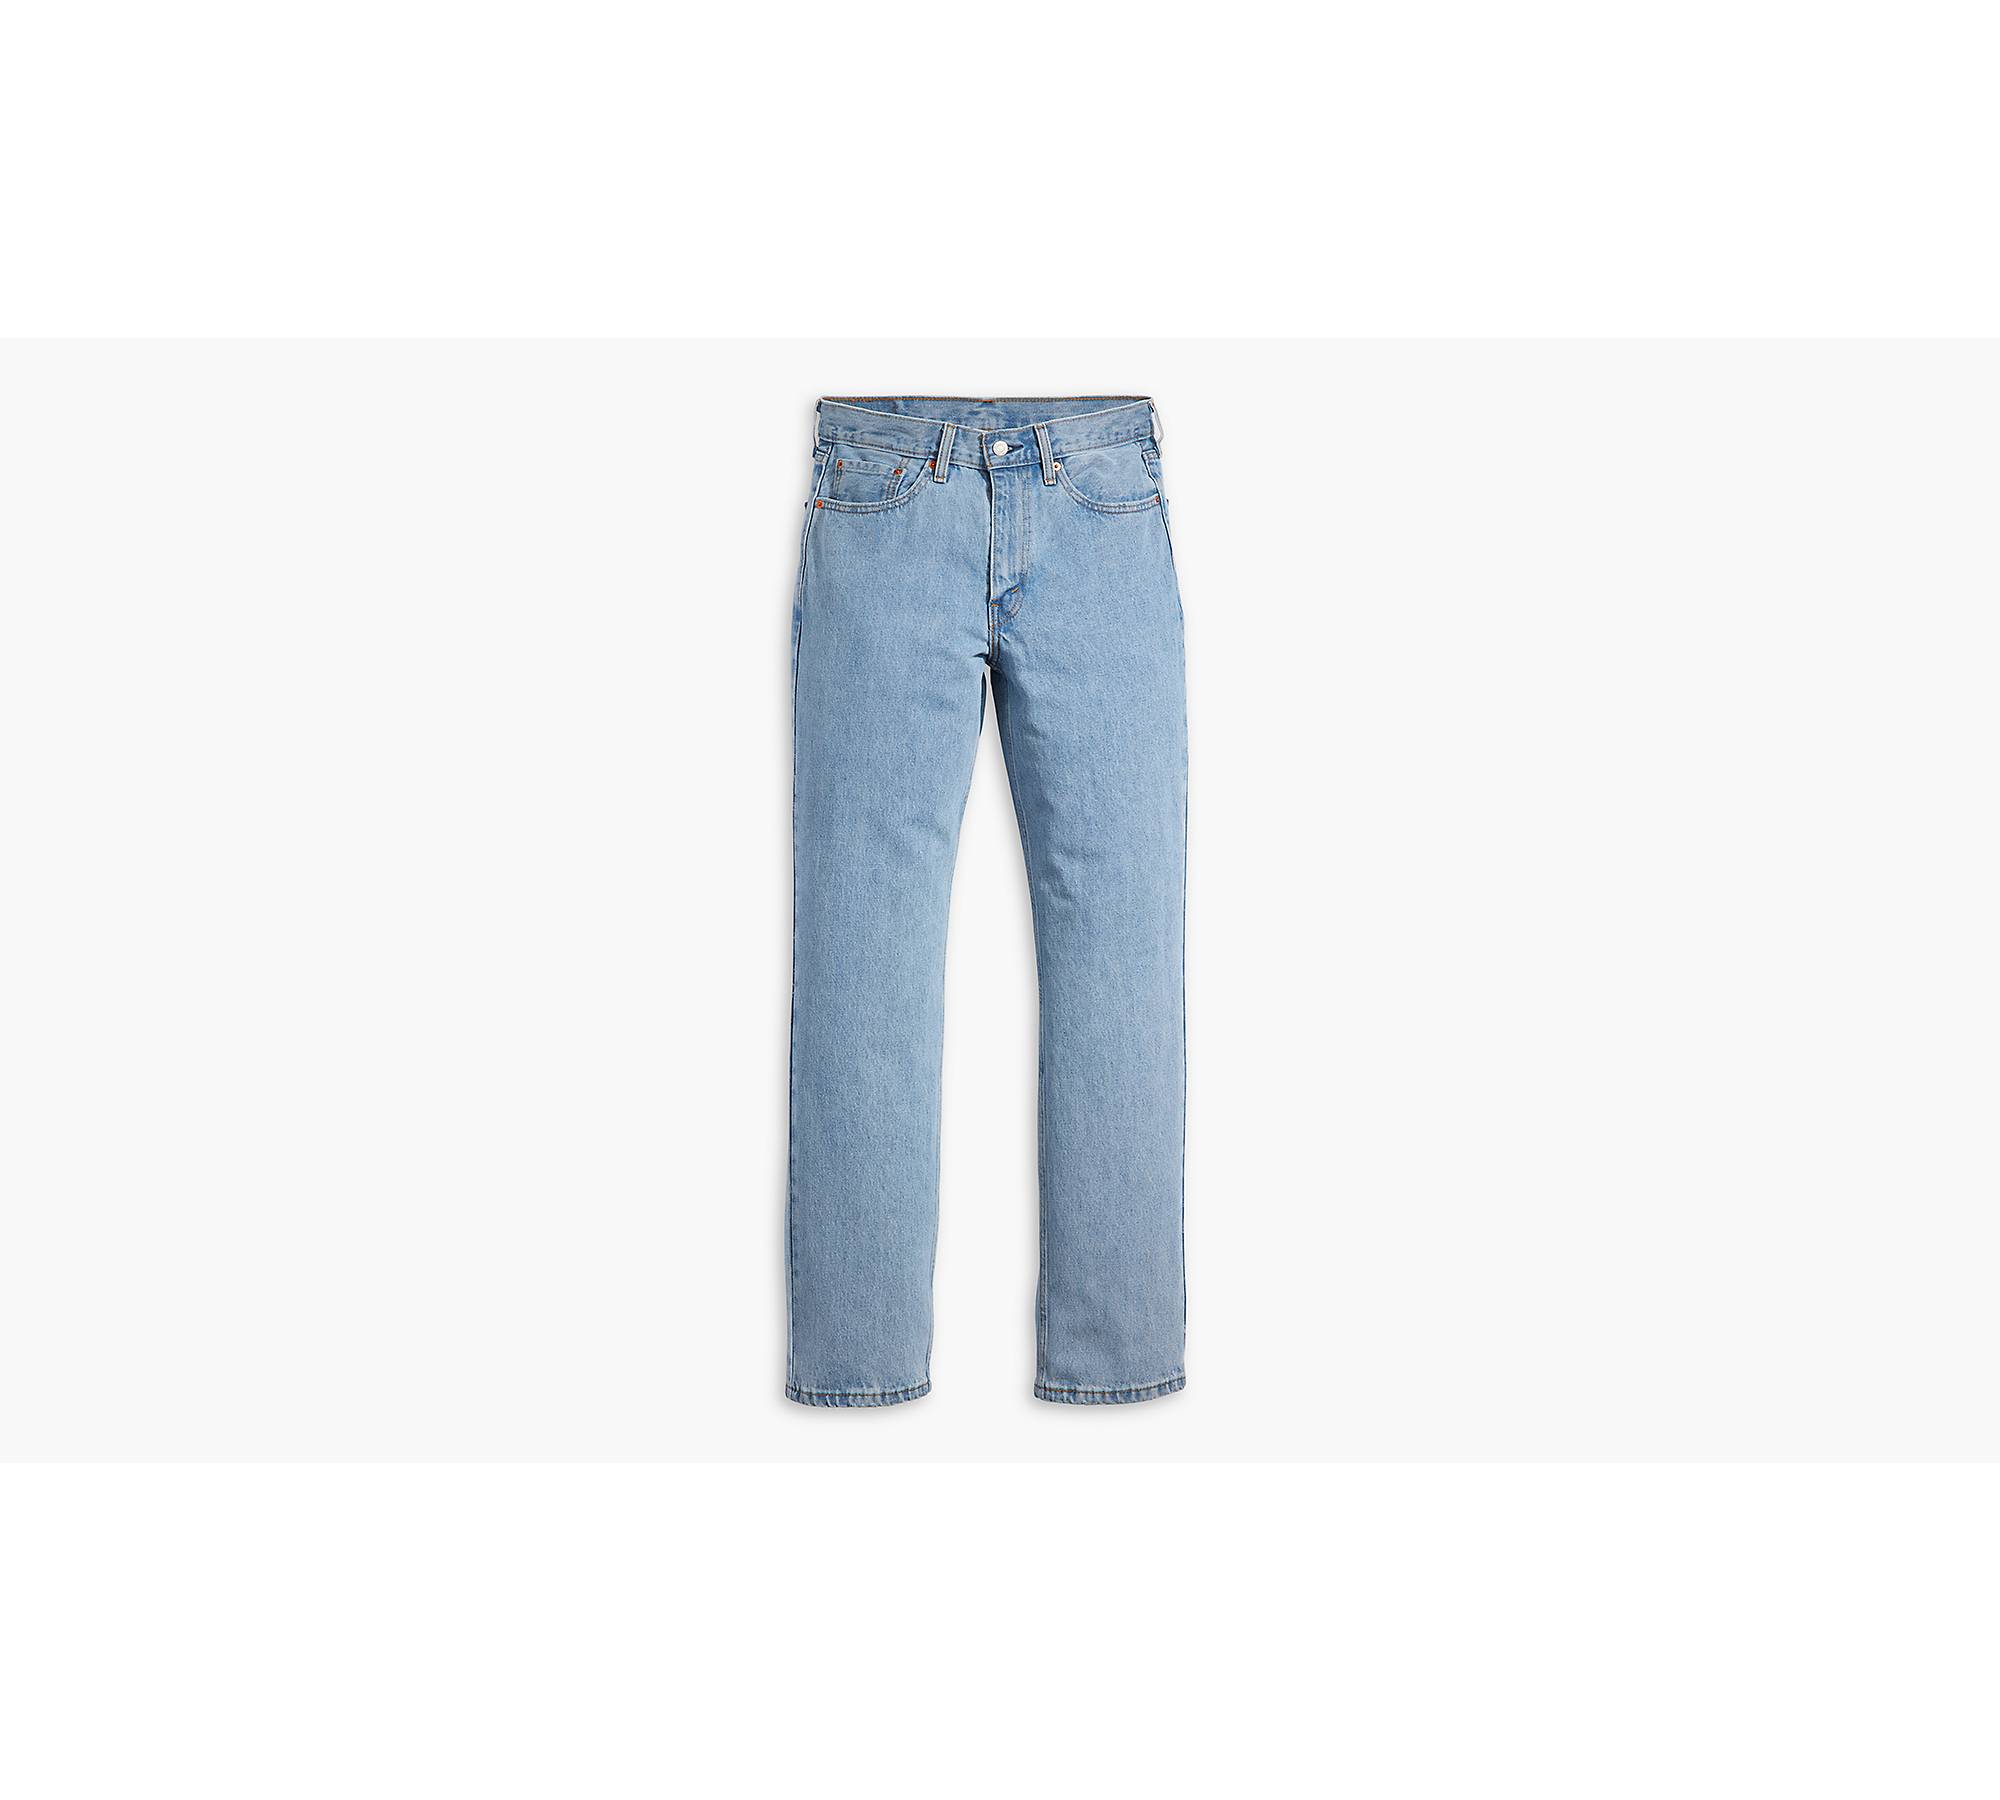 Levi's - 550 '92 Relaxed / Light Indigo - Biscuit General Store